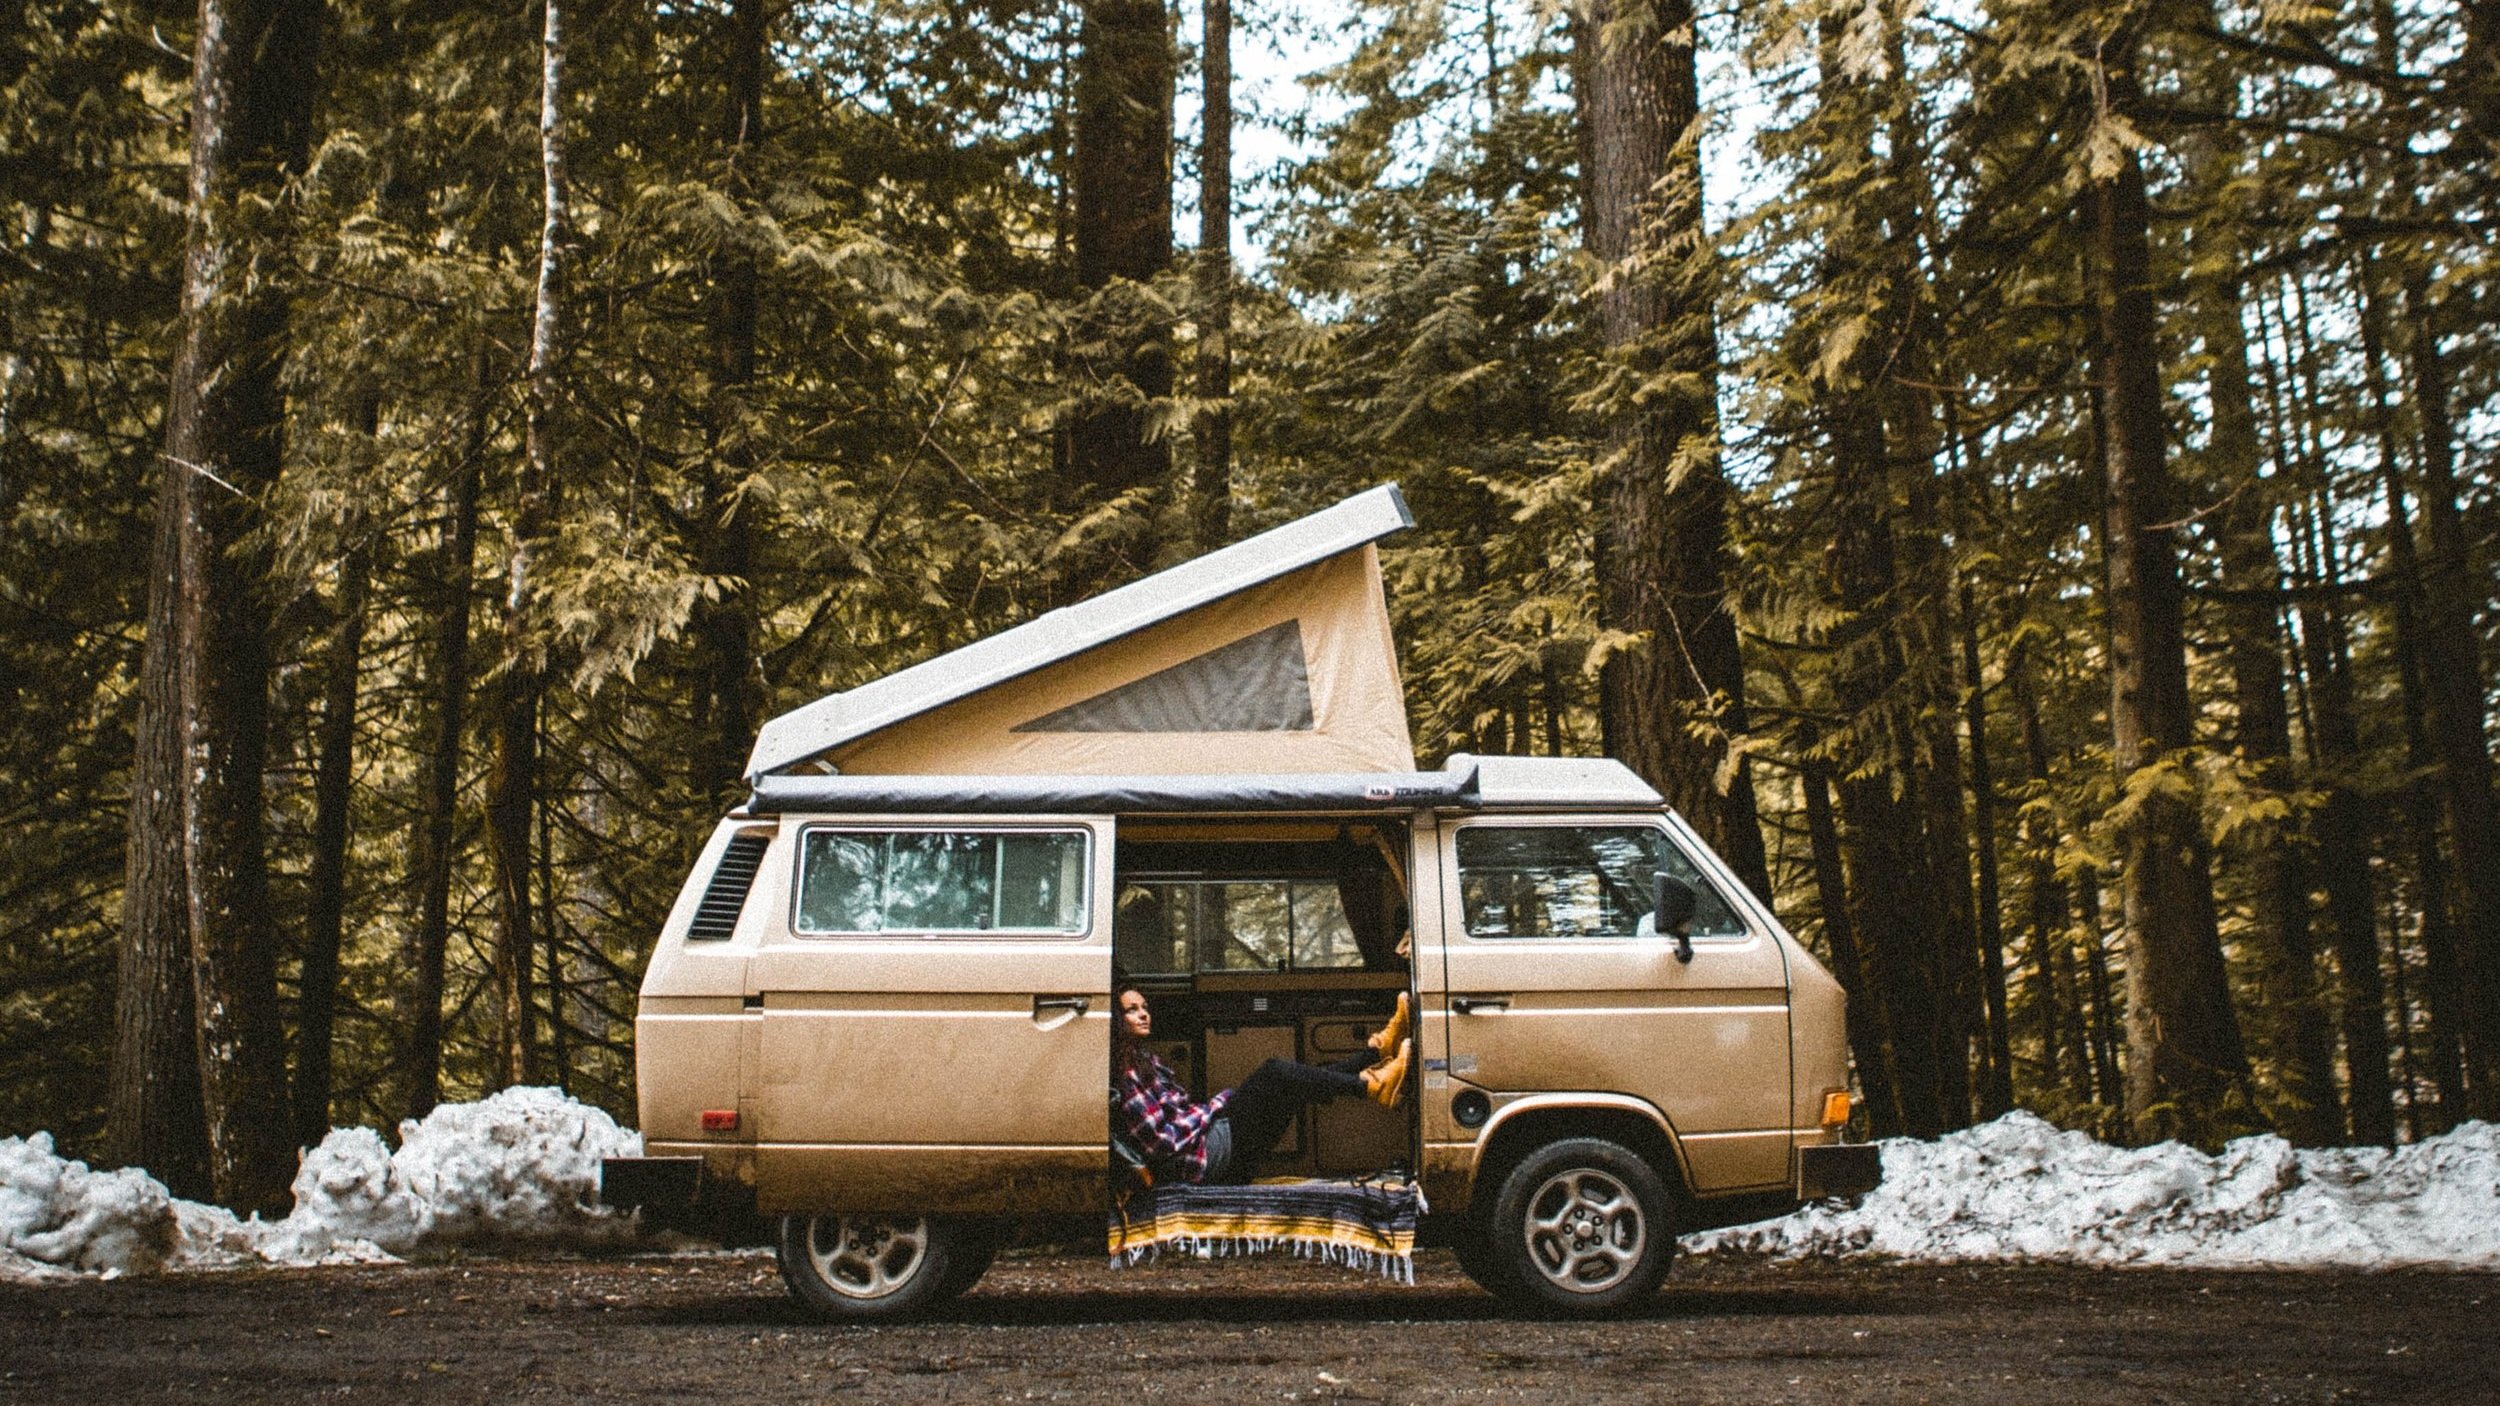 How to prepare for Van Life?